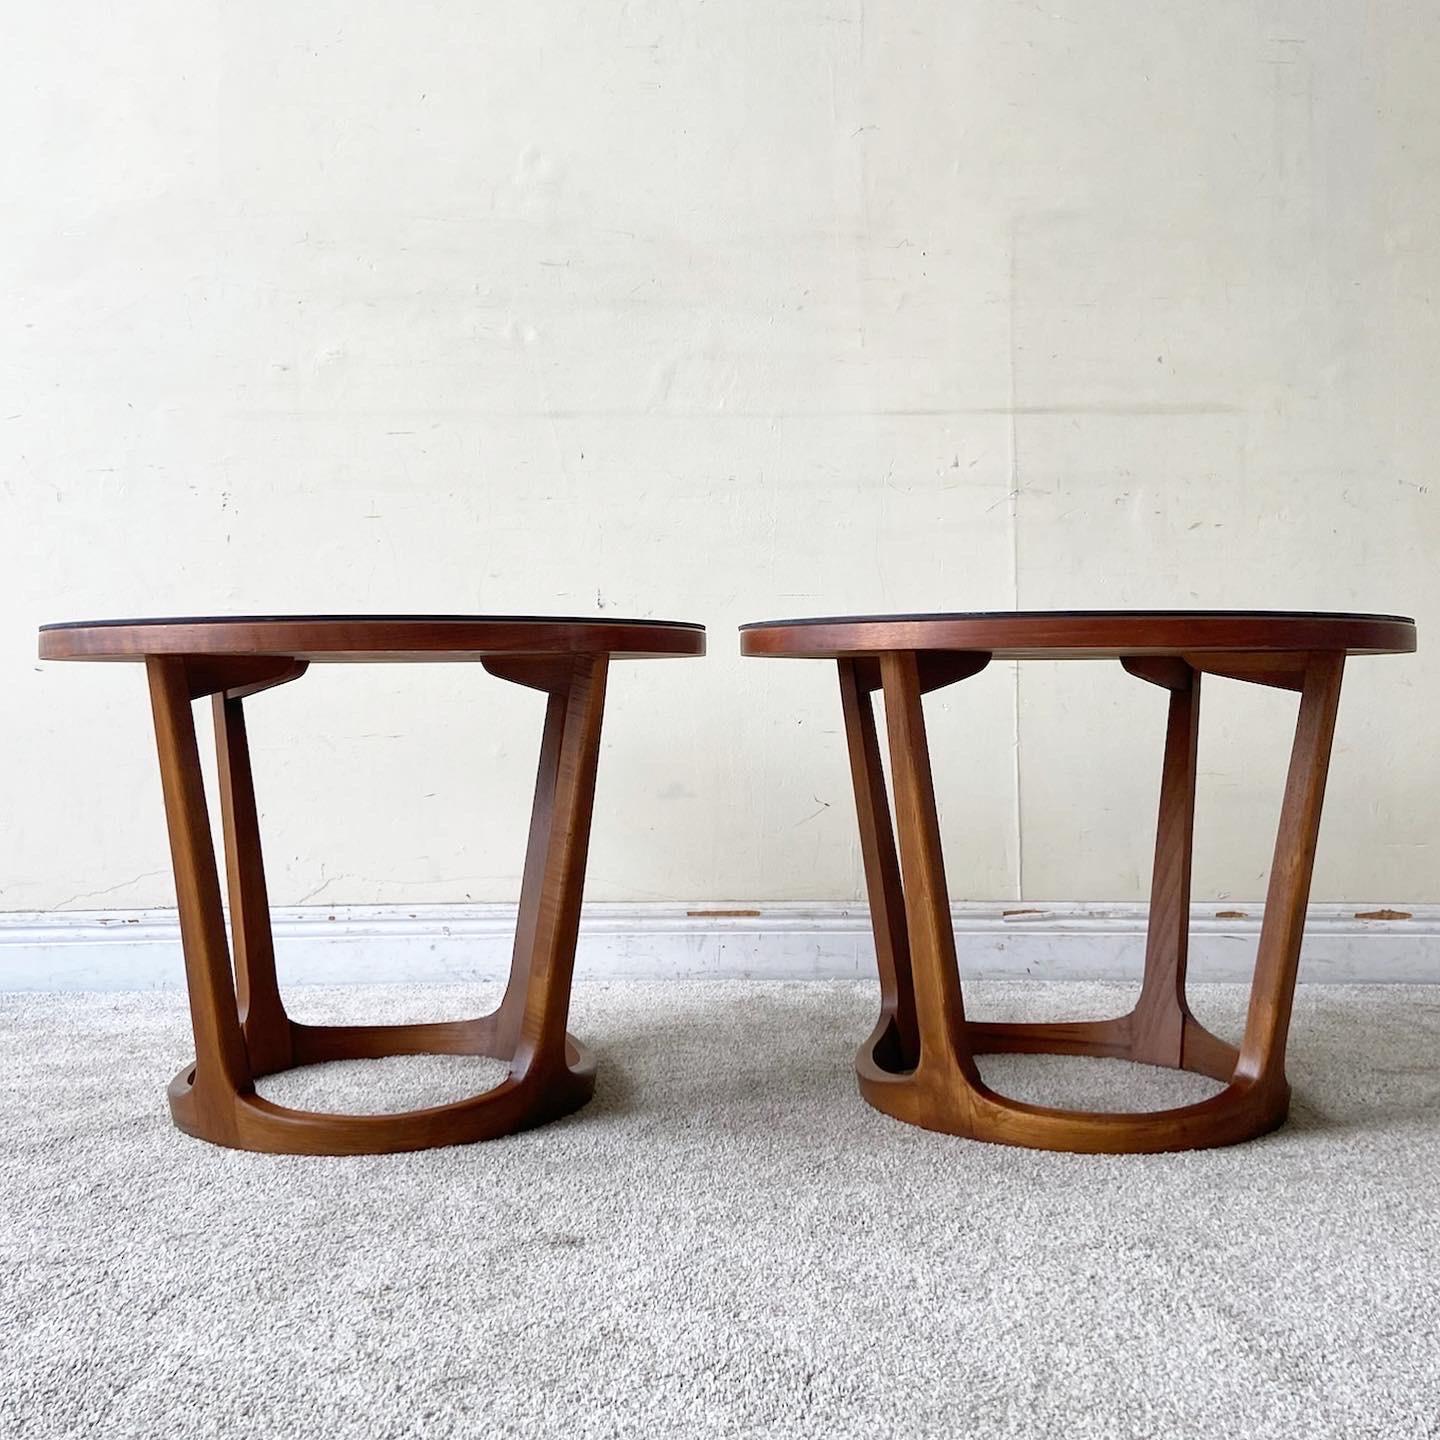 Exceptional Mid-Century Modern round end table in walnut from the Rhythm Collection by Lane Furniture. In their brochure as Drum Table 997-22. It retains its original makers mark as well as model number 997.22 and serial numbers.